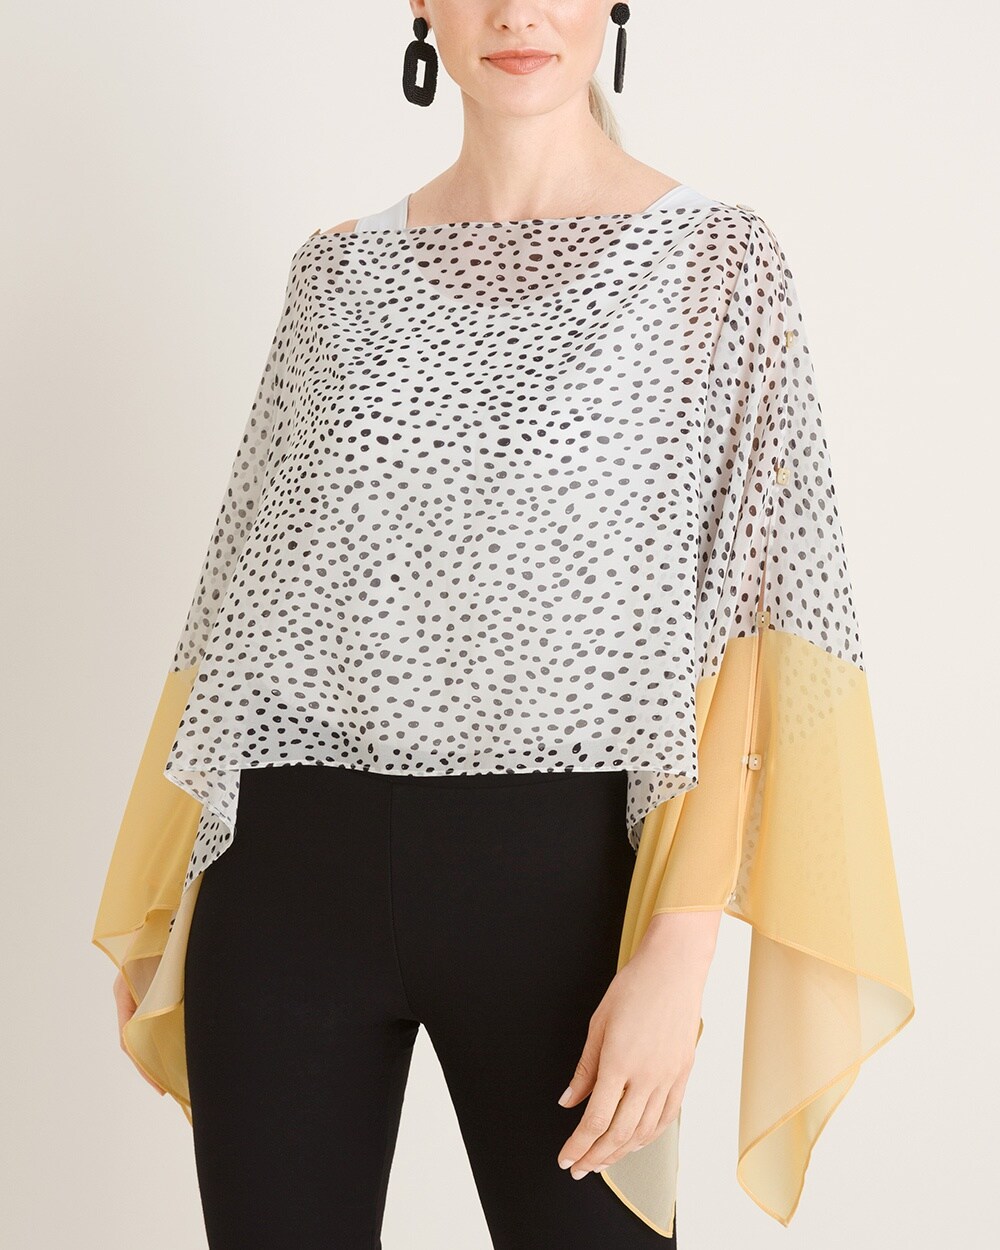 Marla Wynne for Chico's Dot Convertible Poncho